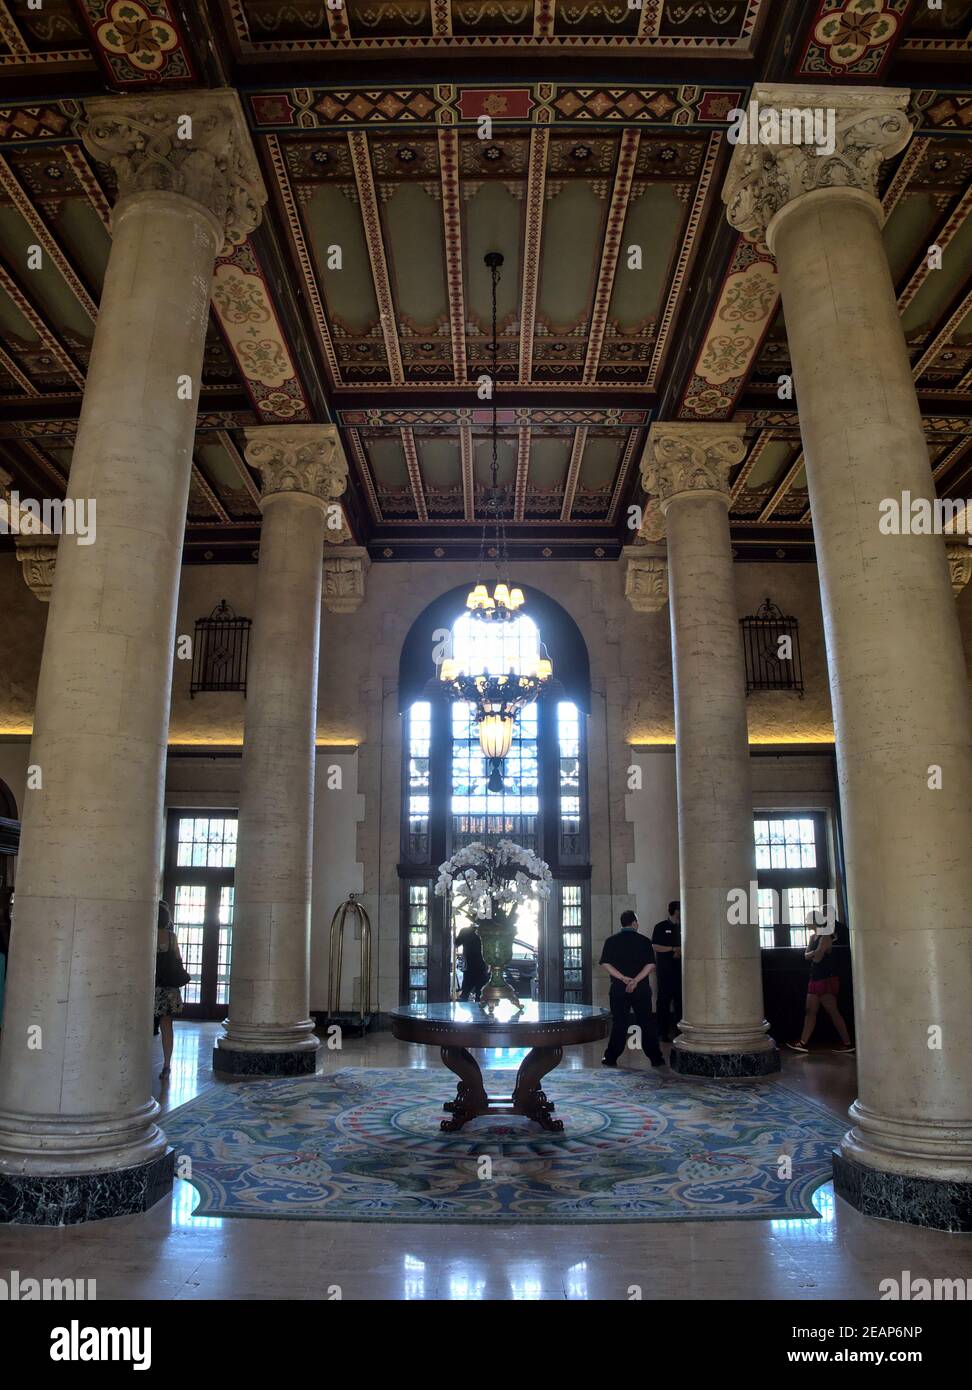 Coral Gables, Florida, USA - 2020: Main hall of the Miami Biltmore Hotel, a historic luxury hotel built in 1926. Stock Photo